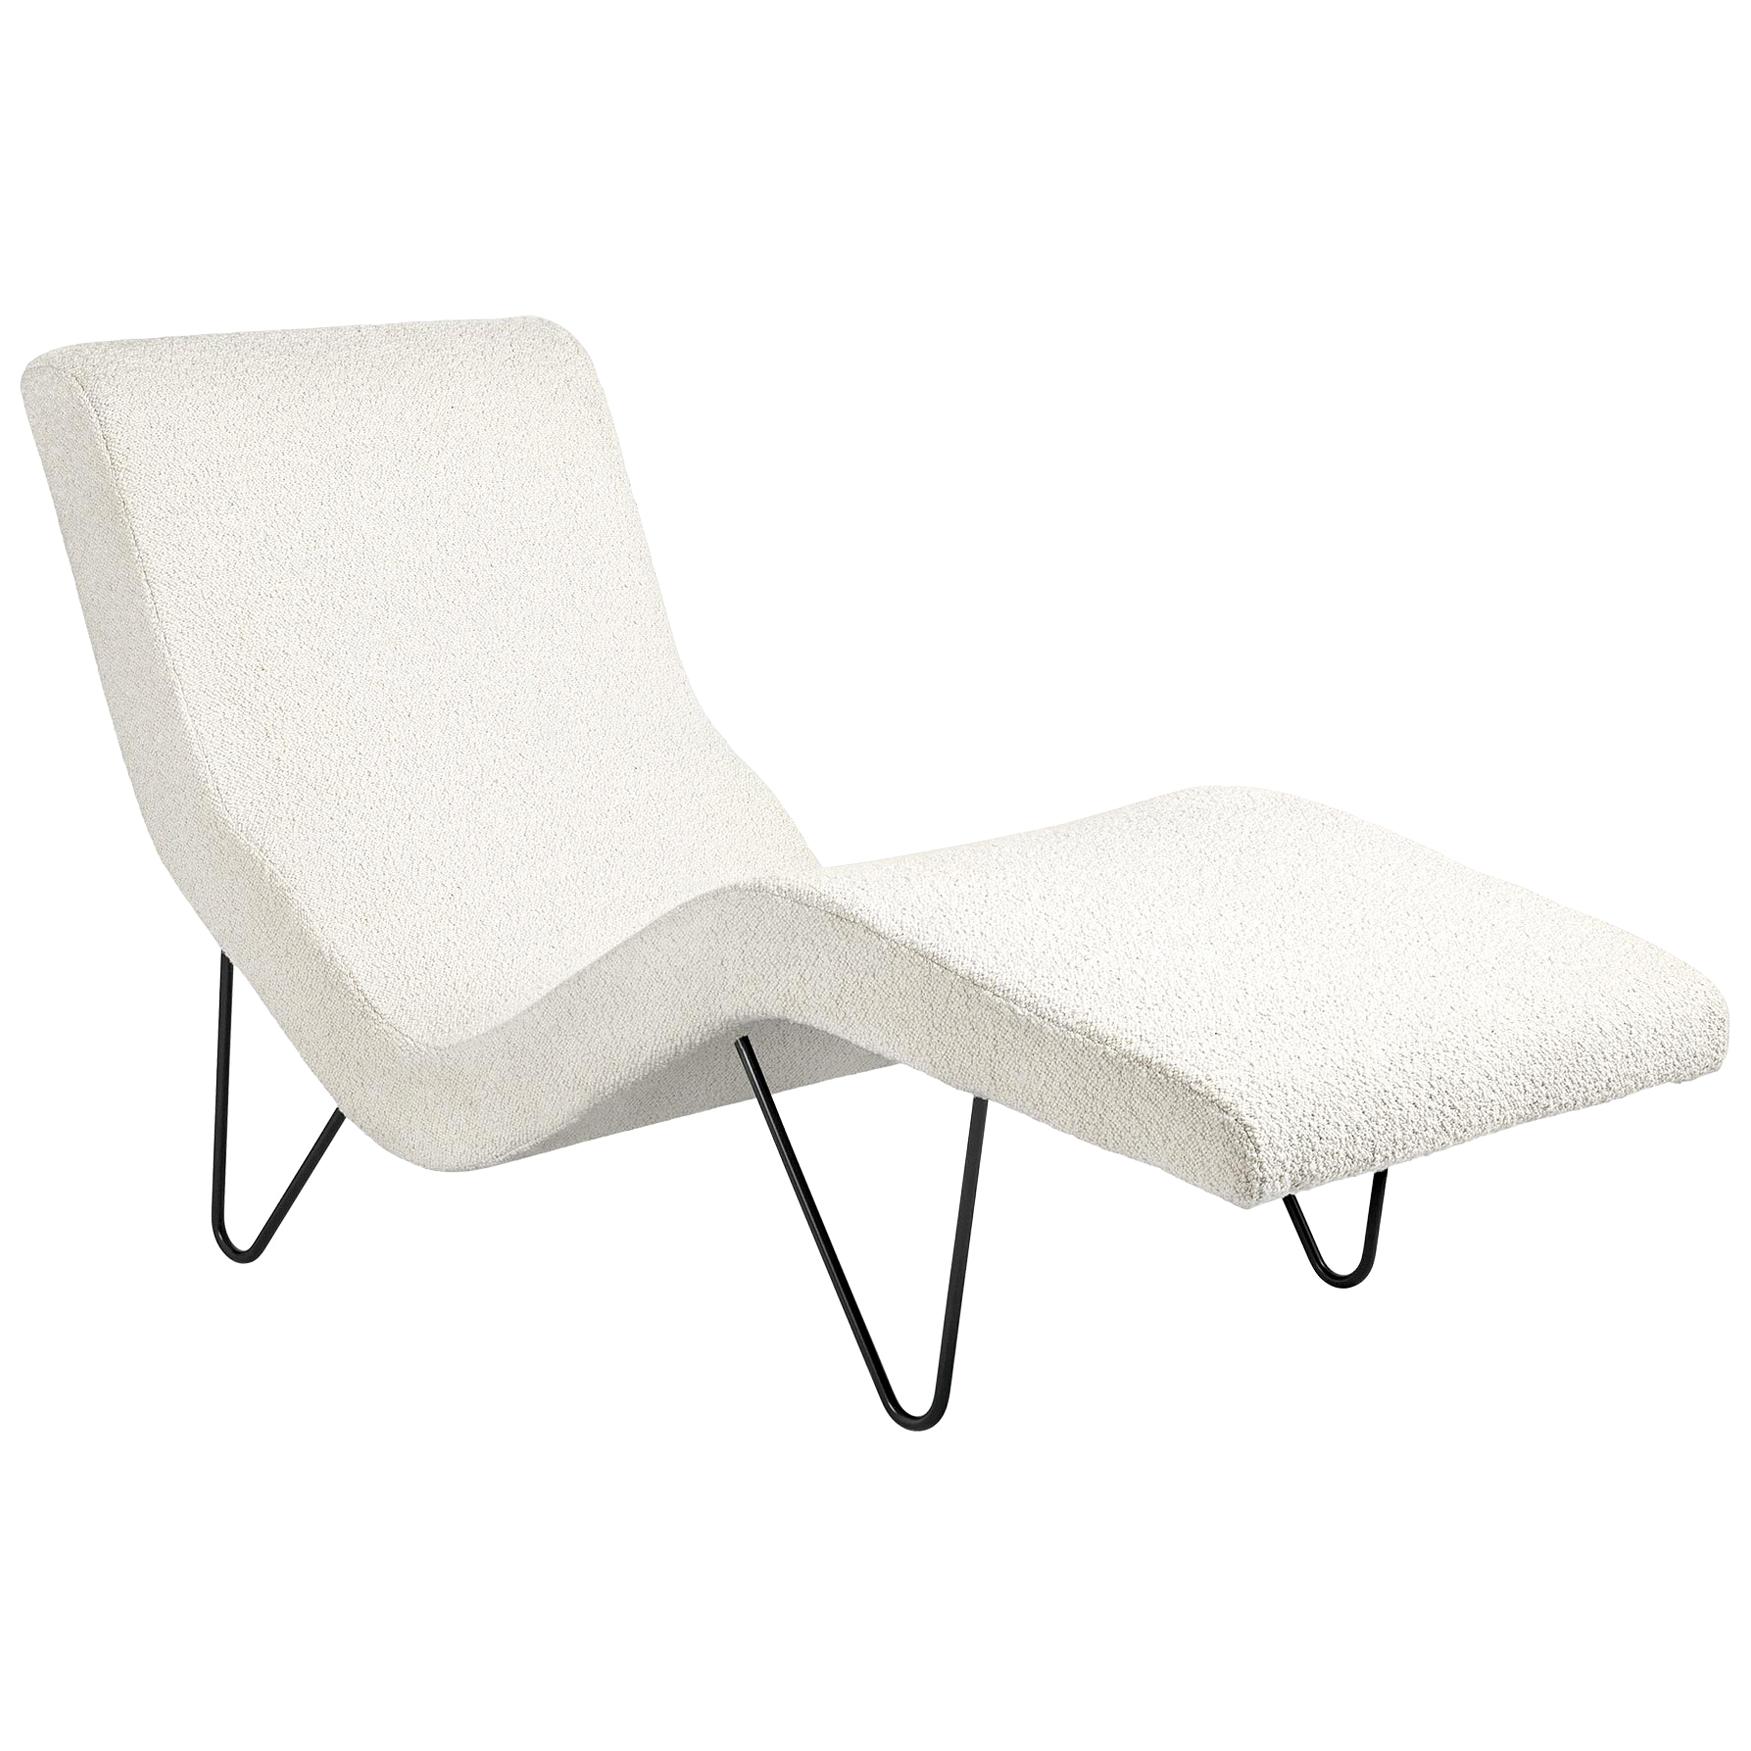 GMG Chaise Longue For Sale